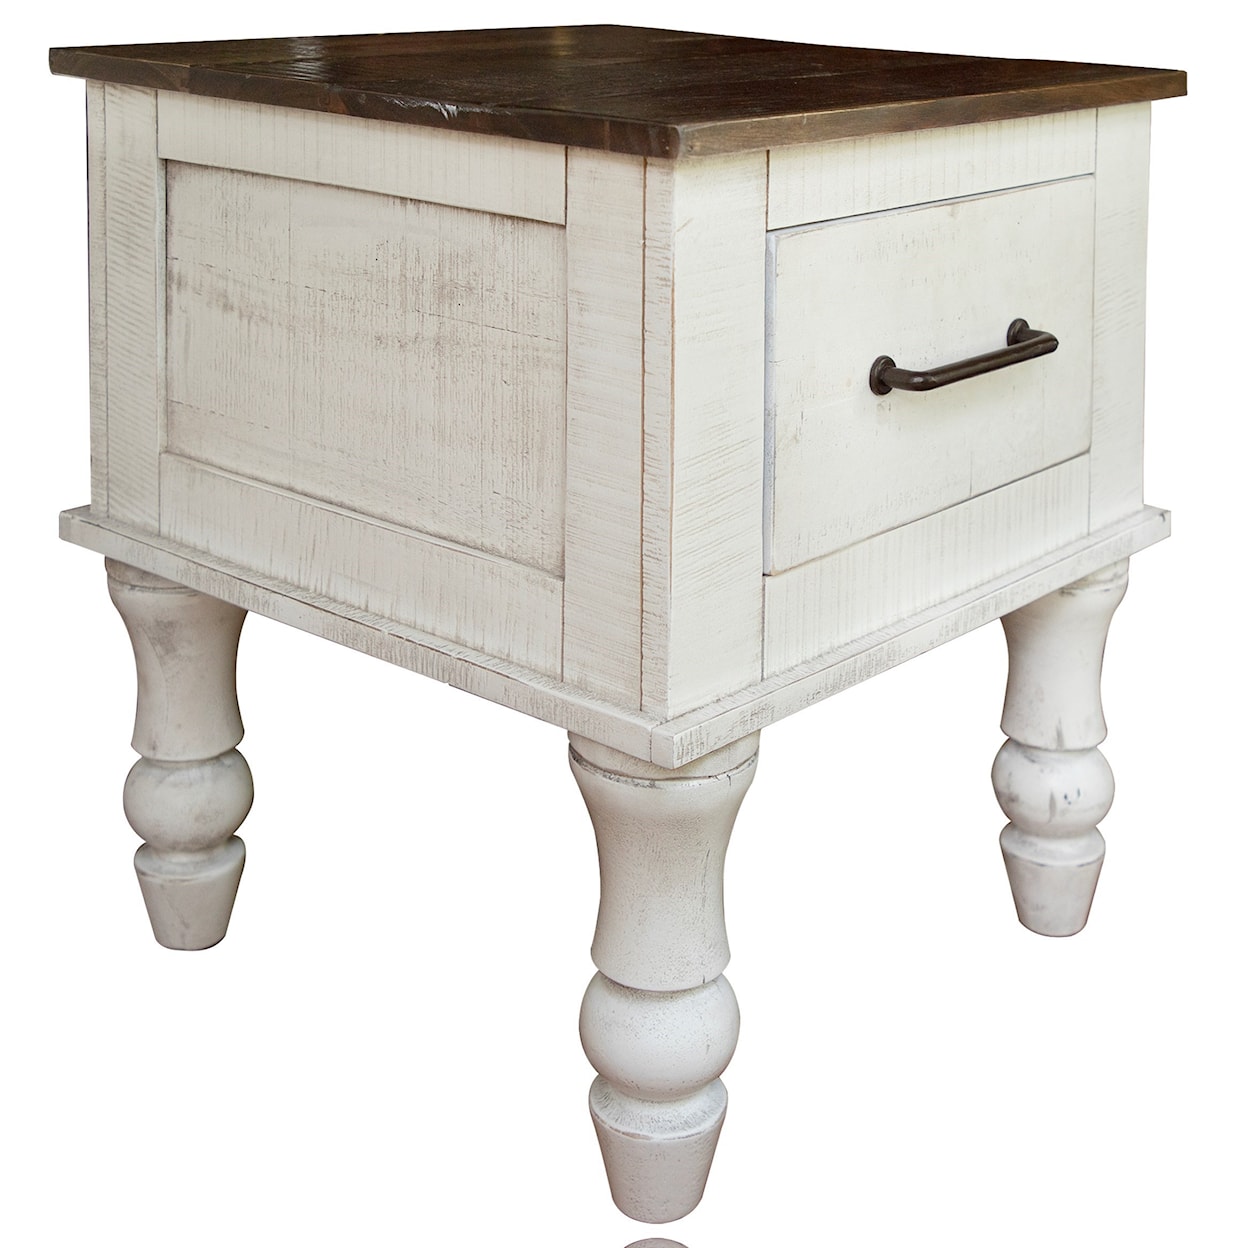 VFM Signature Rock Valley End Table